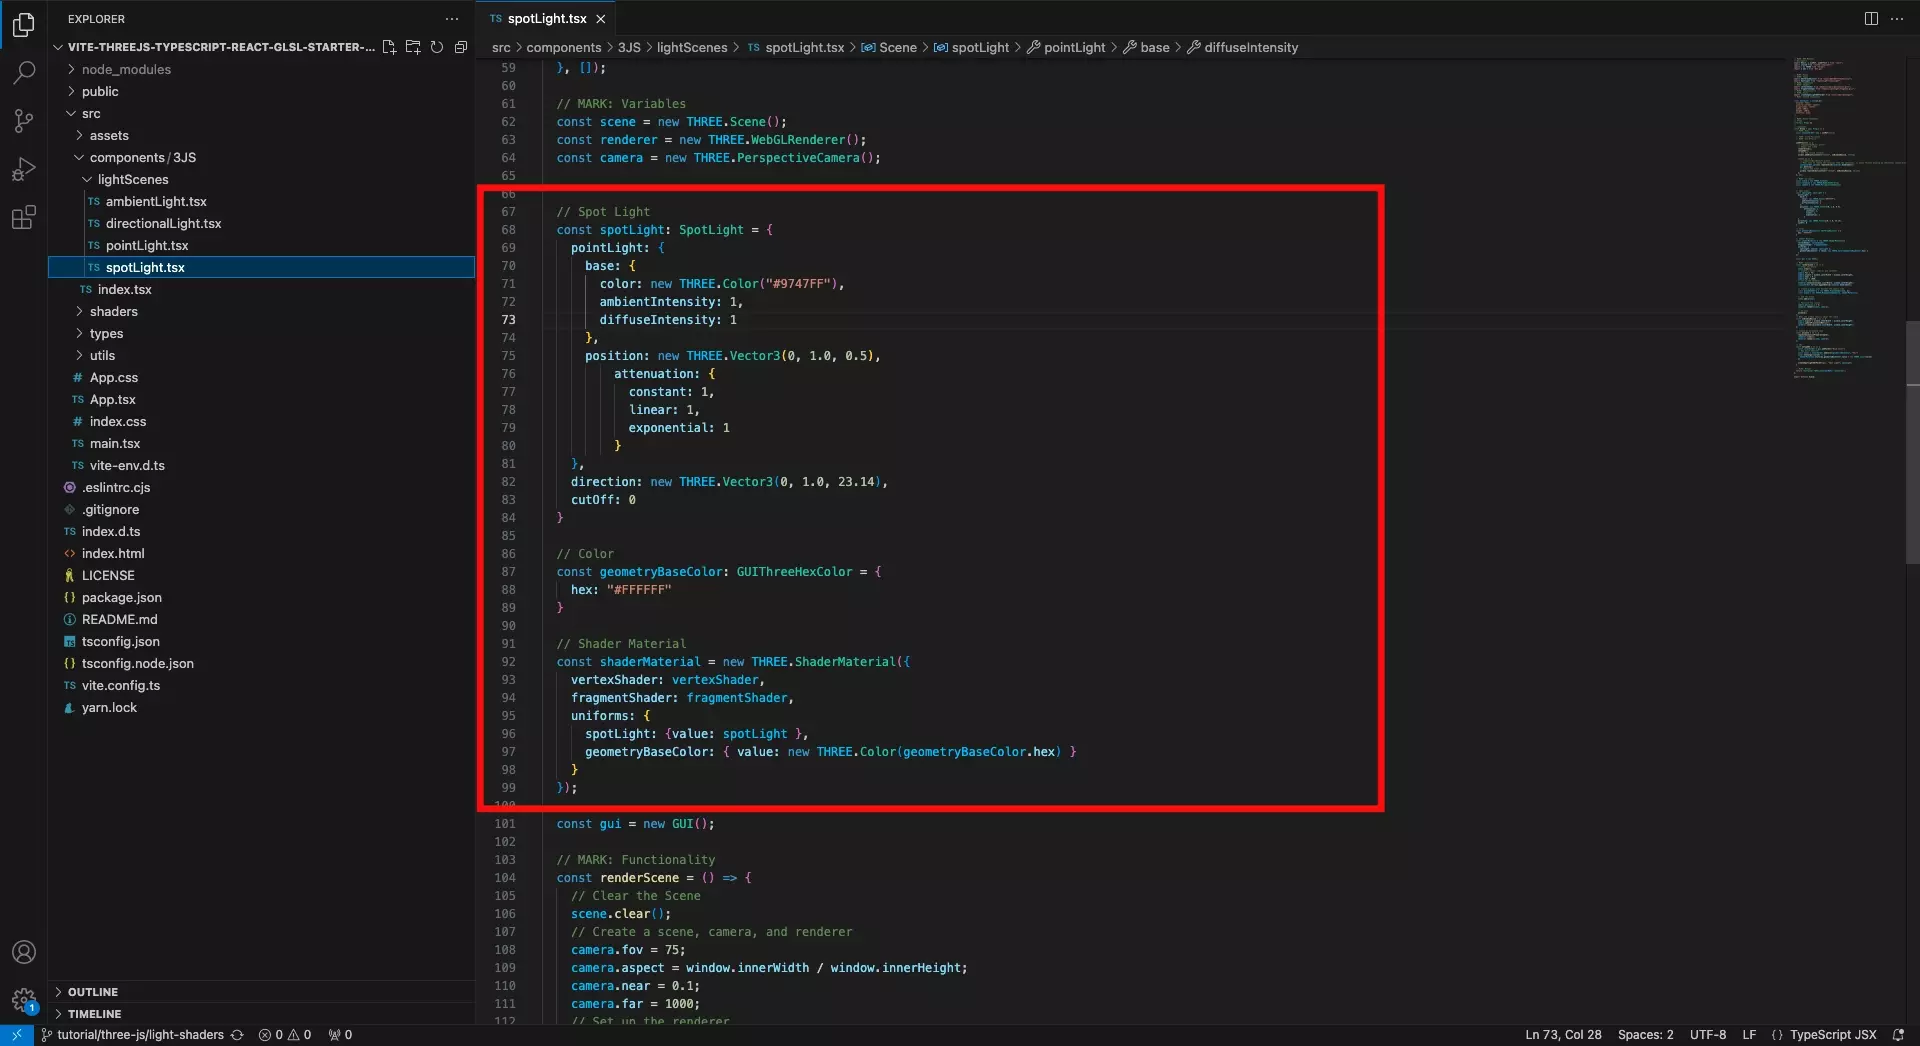 A screenshot of VSCode showing the updates we made to the scene.